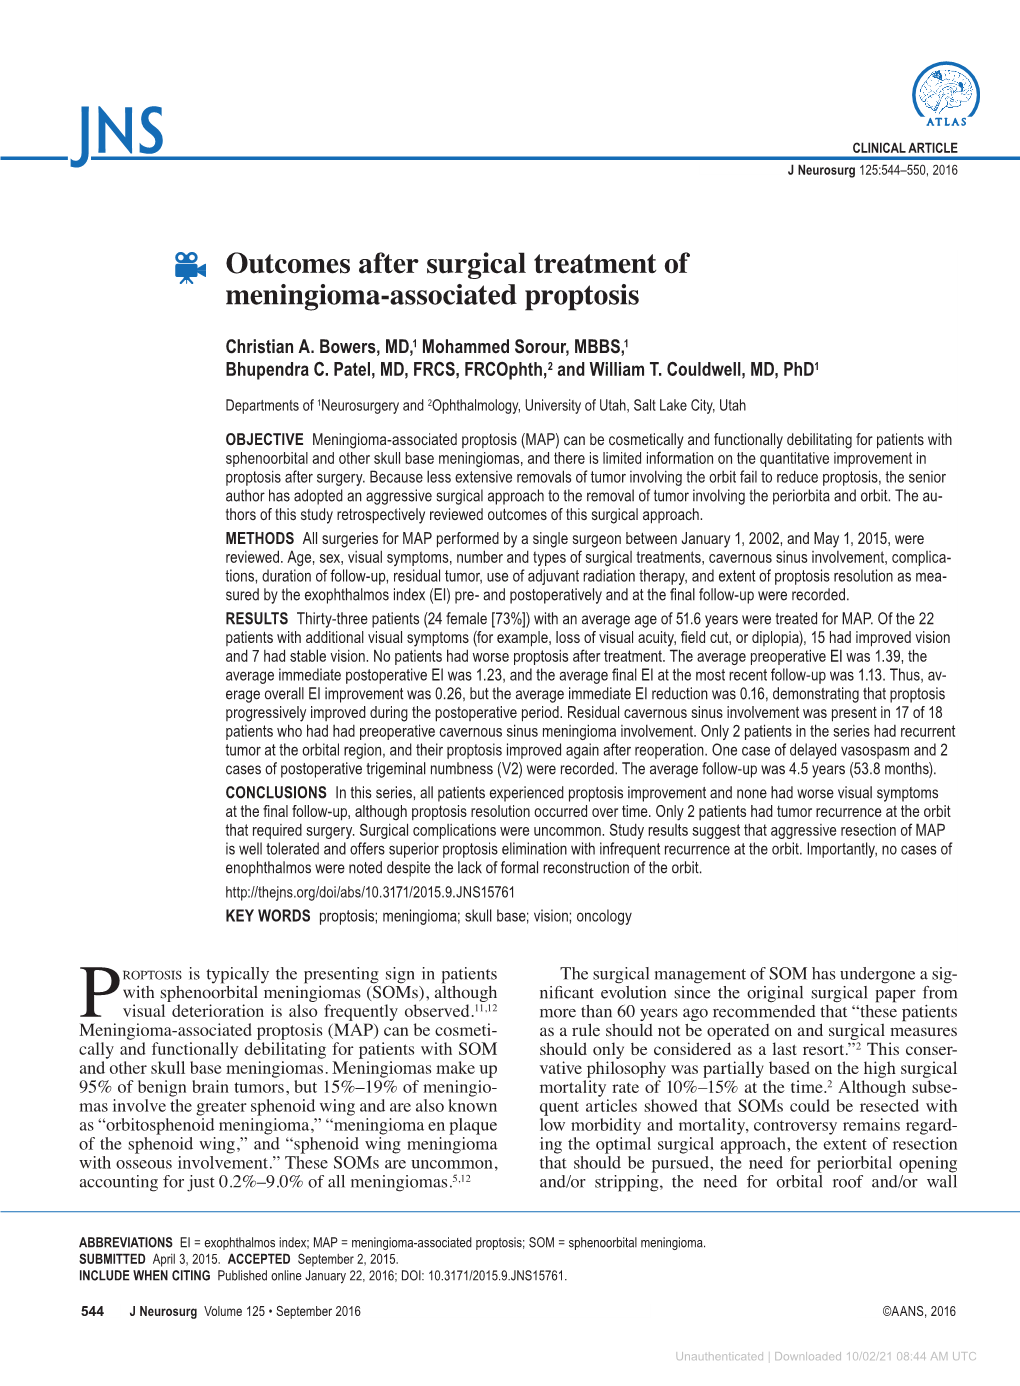 Outcomes After Surgical Treatment of Meningioma-Associated Proptosis